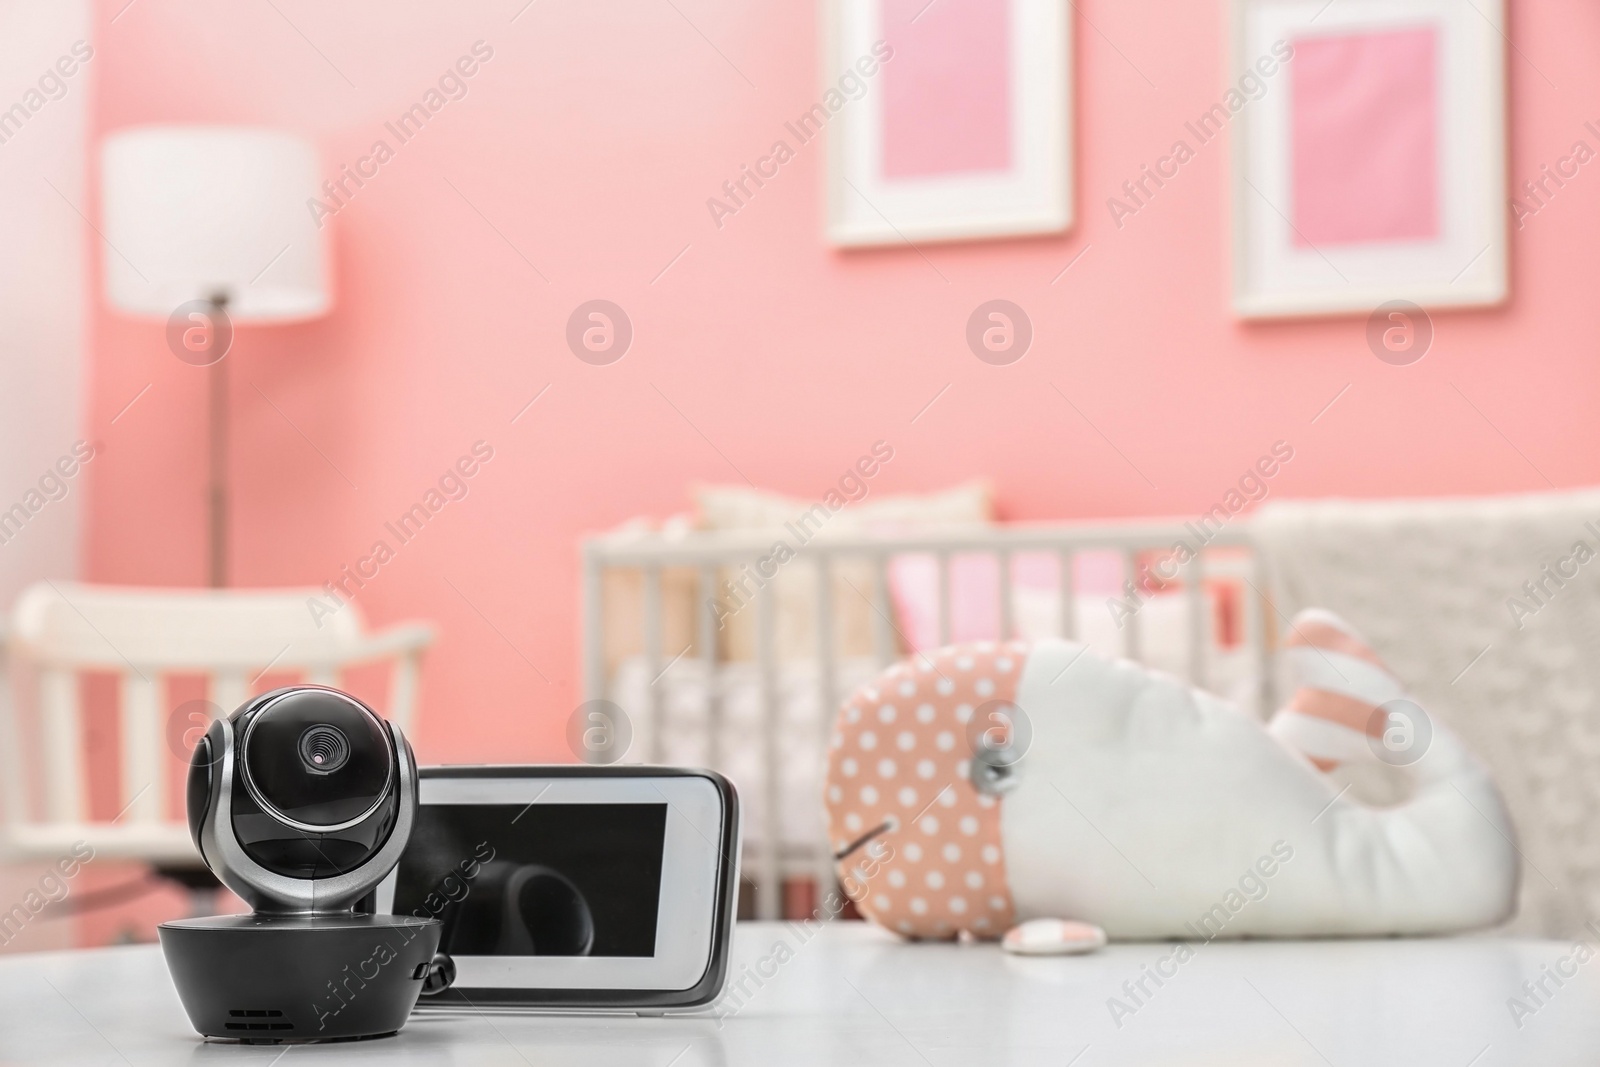 Photo of Baby monitors on table in room, space for text. CCTV equipment